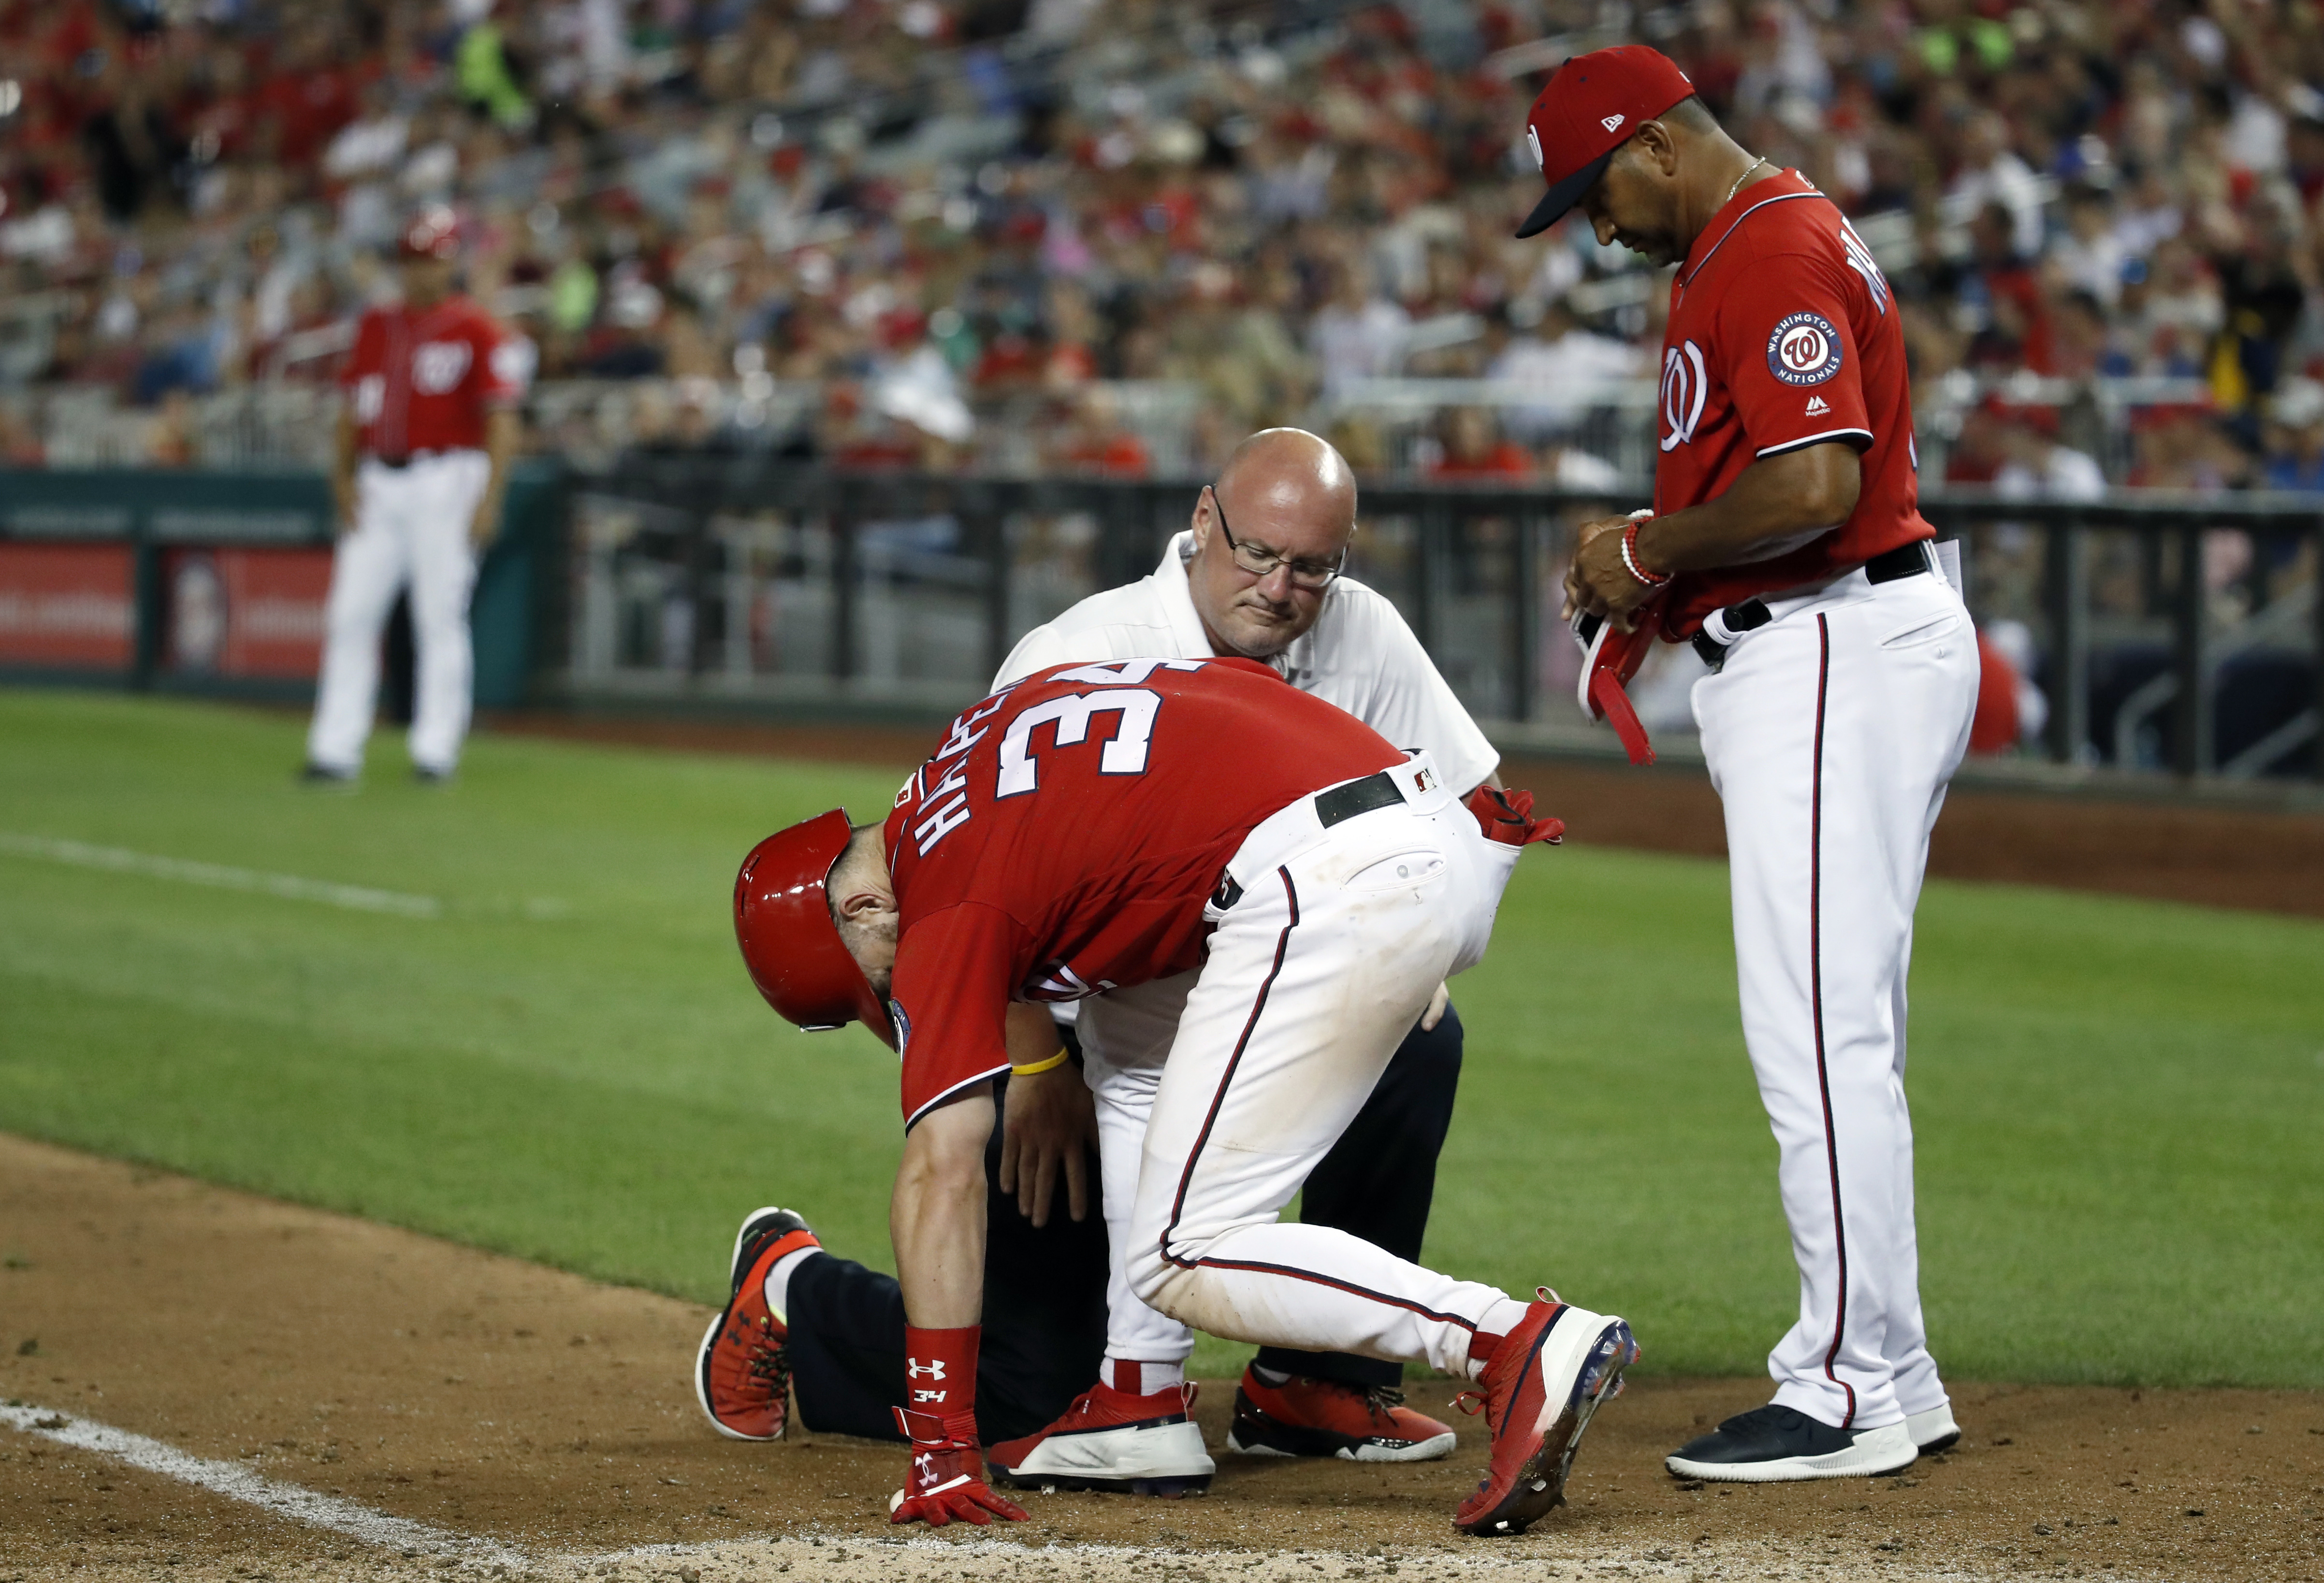 Bryce Harper pulled after being hit in knee by pitch